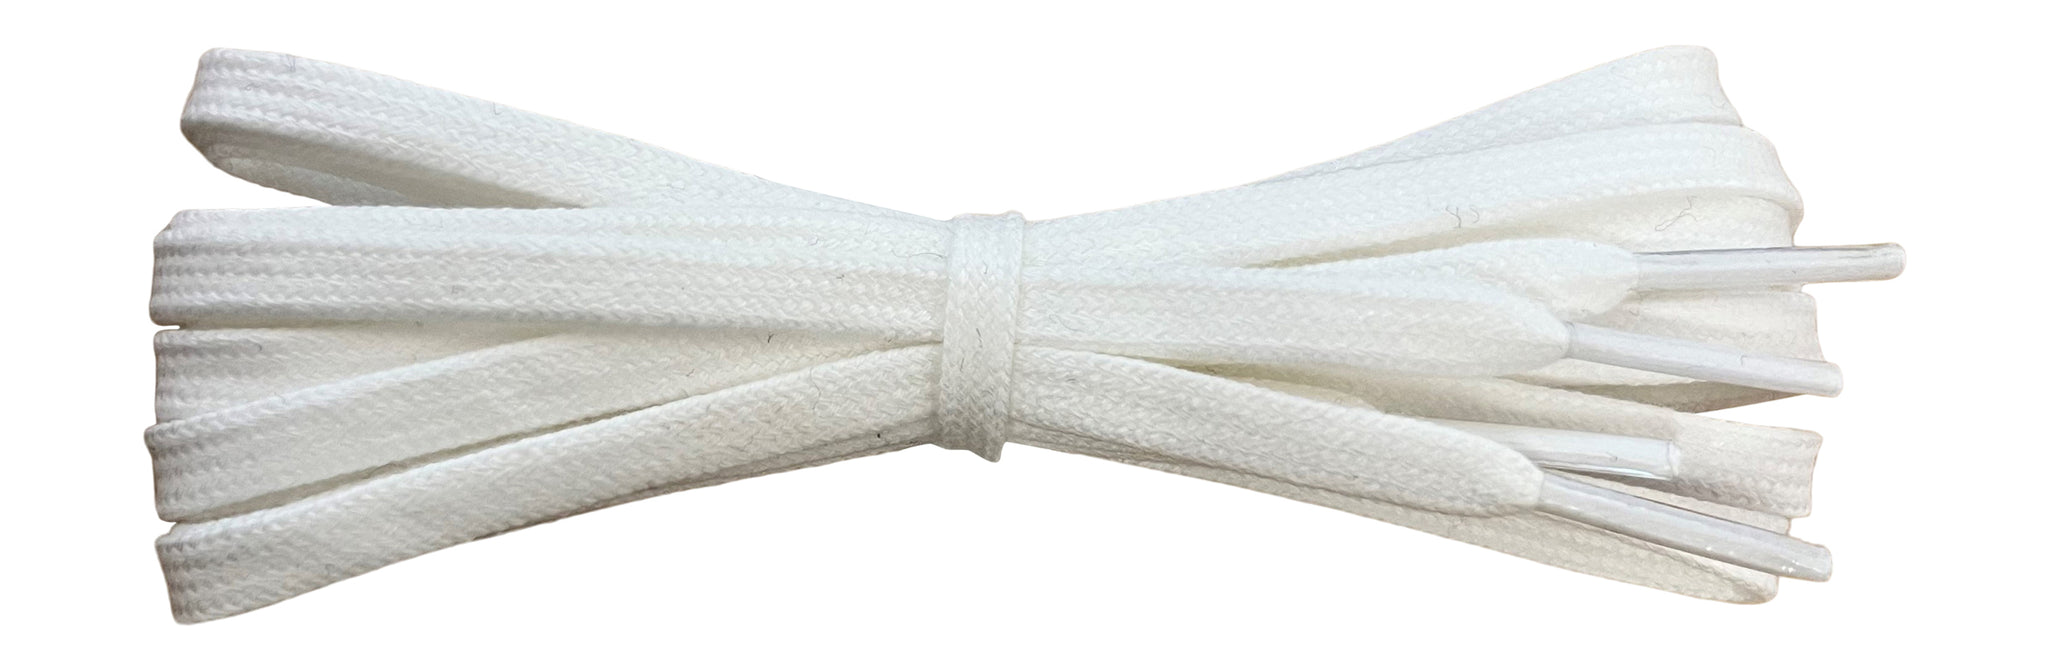 6mm Flat White cotton shoelaces, ideal for most Nike, Reebok, Adidas trainers - fabmania shoe laces